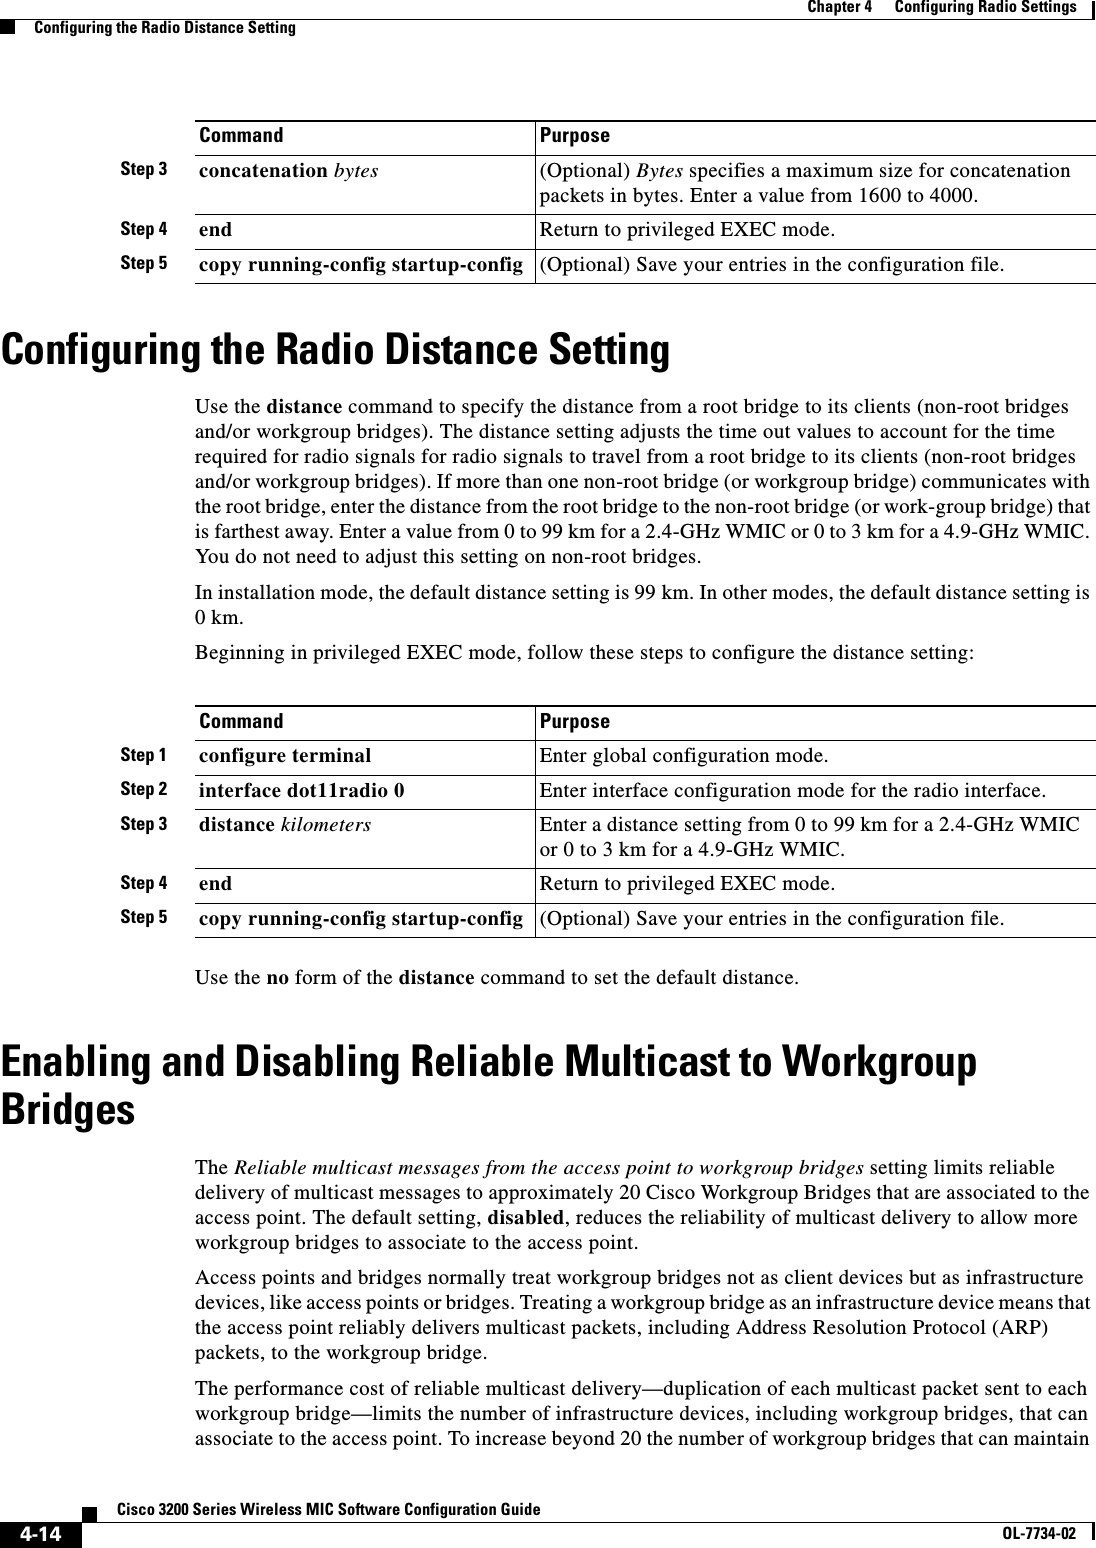 4-14Cisco 3200 Series Wireless MIC Software Configuration GuideOL-7734-02Chapter 4      Configuring Radio SettingsConfiguring the Radio Distance SettingConfiguring the Radio Distance SettingUse the distance command to specify the distance from a root bridge to its clients (non-root bridges and/or workgroup bridges). The distance setting adjusts the time out values to account for the time required for radio signals for radio signals to travel from a root bridge to its clients (non-root bridges and/or workgroup bridges). If more than one non-root bridge (or workgroup bridge) communicates with the root bridge, enter the distance from the root bridge to the non-root bridge (or work-group bridge) that is farthest away. Enter a value from 0 to 99 km for a 2.4-GHz WMIC or 0 to 3 km for a 4.9-GHz WMIC. You do not need to adjust this setting on non-root bridges.In installation mode, the default distance setting is 99 km. In other modes, the default distance setting is 0km.Beginning in privileged EXEC mode, follow these steps to configure the distance setting:Use the no form of the distance command to set the default distance.Enabling and Disabling Reliable Multicast to Workgroup BridgesThe Reliable multicast messages from the access point to workgroup bridges setting limits reliable delivery of multicast messages to approximately 20 Cisco Workgroup Bridges that are associated to the access point. The default setting, disabled, reduces the reliability of multicast delivery to allow more workgroup bridges to associate to the access point.Access points and bridges normally treat workgroup bridges not as client devices but as infrastructure devices, like access points or bridges. Treating a workgroup bridge as an infrastructure device means that the access point reliably delivers multicast packets, including Address Resolution Protocol (ARP) packets, to the workgroup bridge. The performance cost of reliable multicast delivery—duplication of each multicast packet sent to each workgroup bridge—limits the number of infrastructure devices, including workgroup bridges, that can associate to the access point. To increase beyond 20 the number of workgroup bridges that can maintain Step 3 concatenation bytes (Optional) Bytes specifies a maximum size for concatenation packets in bytes. Enter a value from 1600 to 4000.Step 4 end Return to privileged EXEC mode.Step 5 copy running-config startup-config (Optional) Save your entries in the configuration file.Command PurposeCommand PurposeStep 1 configure terminal Enter global configuration mode.Step 2 interface dot11radio 0 Enter interface configuration mode for the radio interface. Step 3 distance kilometers  Enter a distance setting from 0 to 99 km for a 2.4-GHz WMIC or 0 to 3 km for a 4.9-GHz WMIC.Step 4 end Return to privileged EXEC mode.Step 5 copy running-config startup-config (Optional) Save your entries in the configuration file.